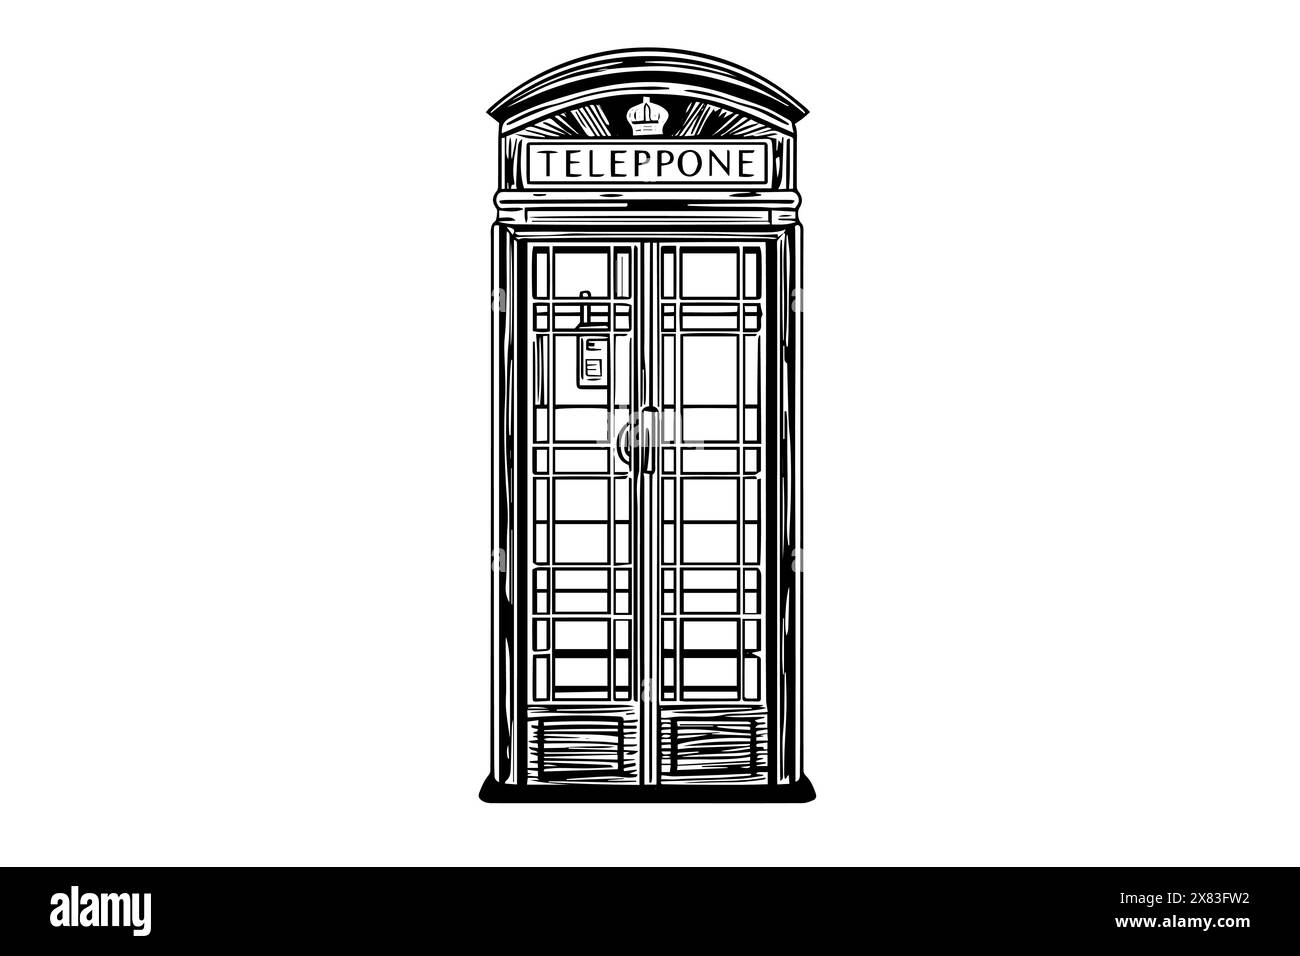 Retro phone box in engraved style vector illustration. Hand drawn ink sketch. Stock Vector